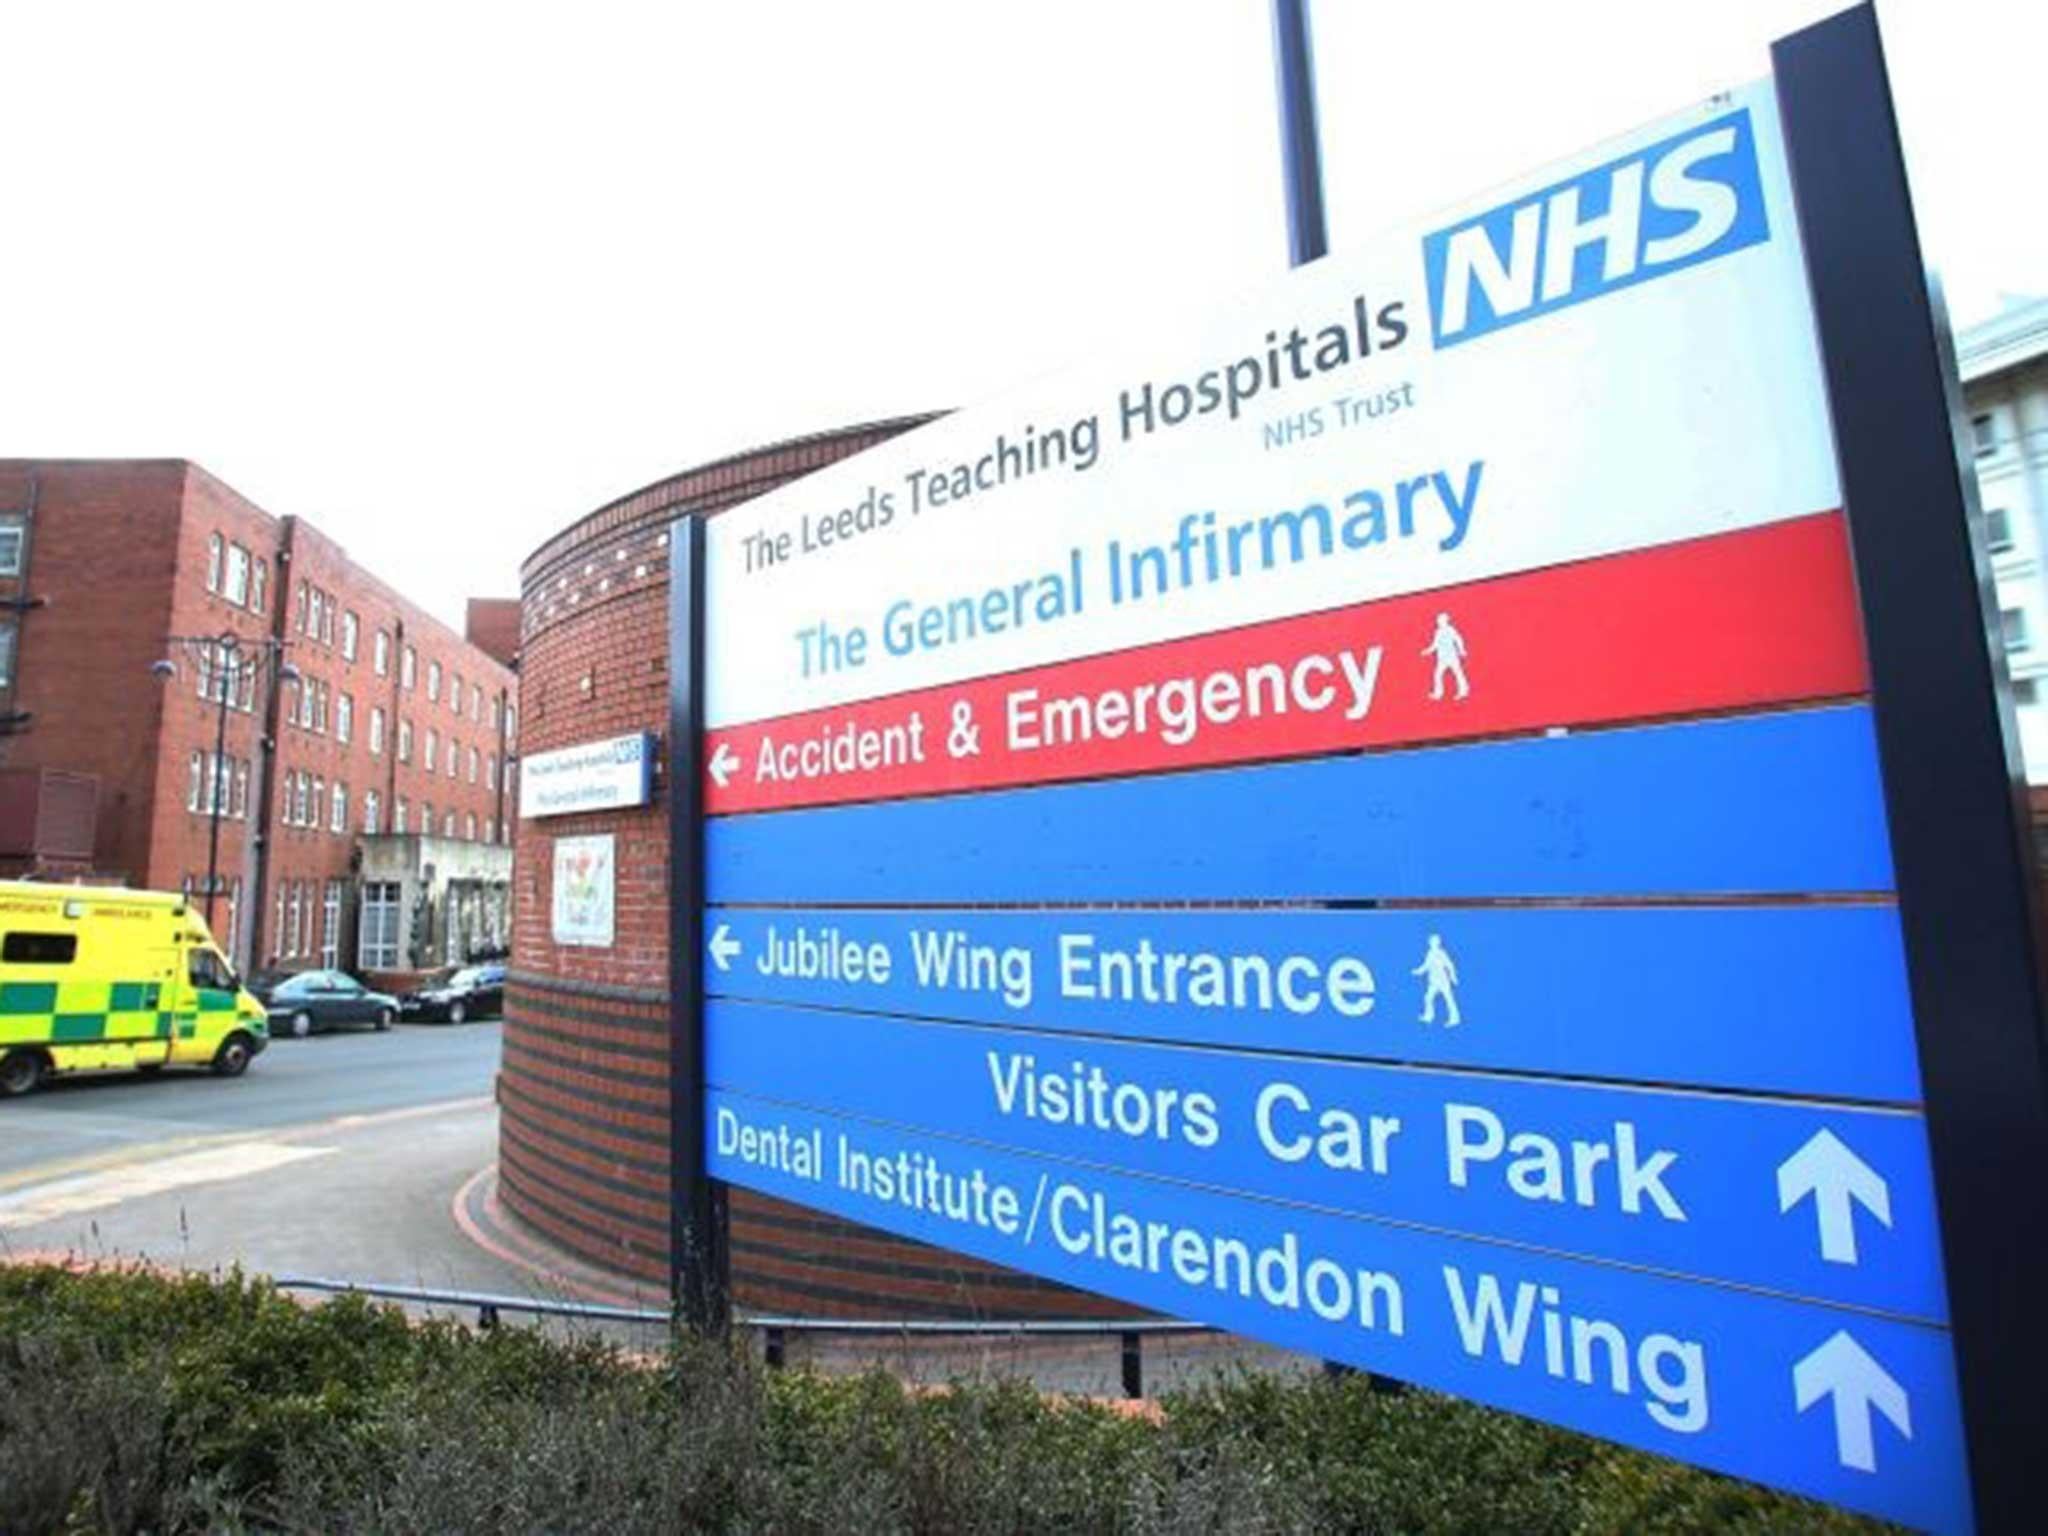 Leeds Teaching Hospitals NHS Trust is experiencing a severe shortage of intensive care nurses